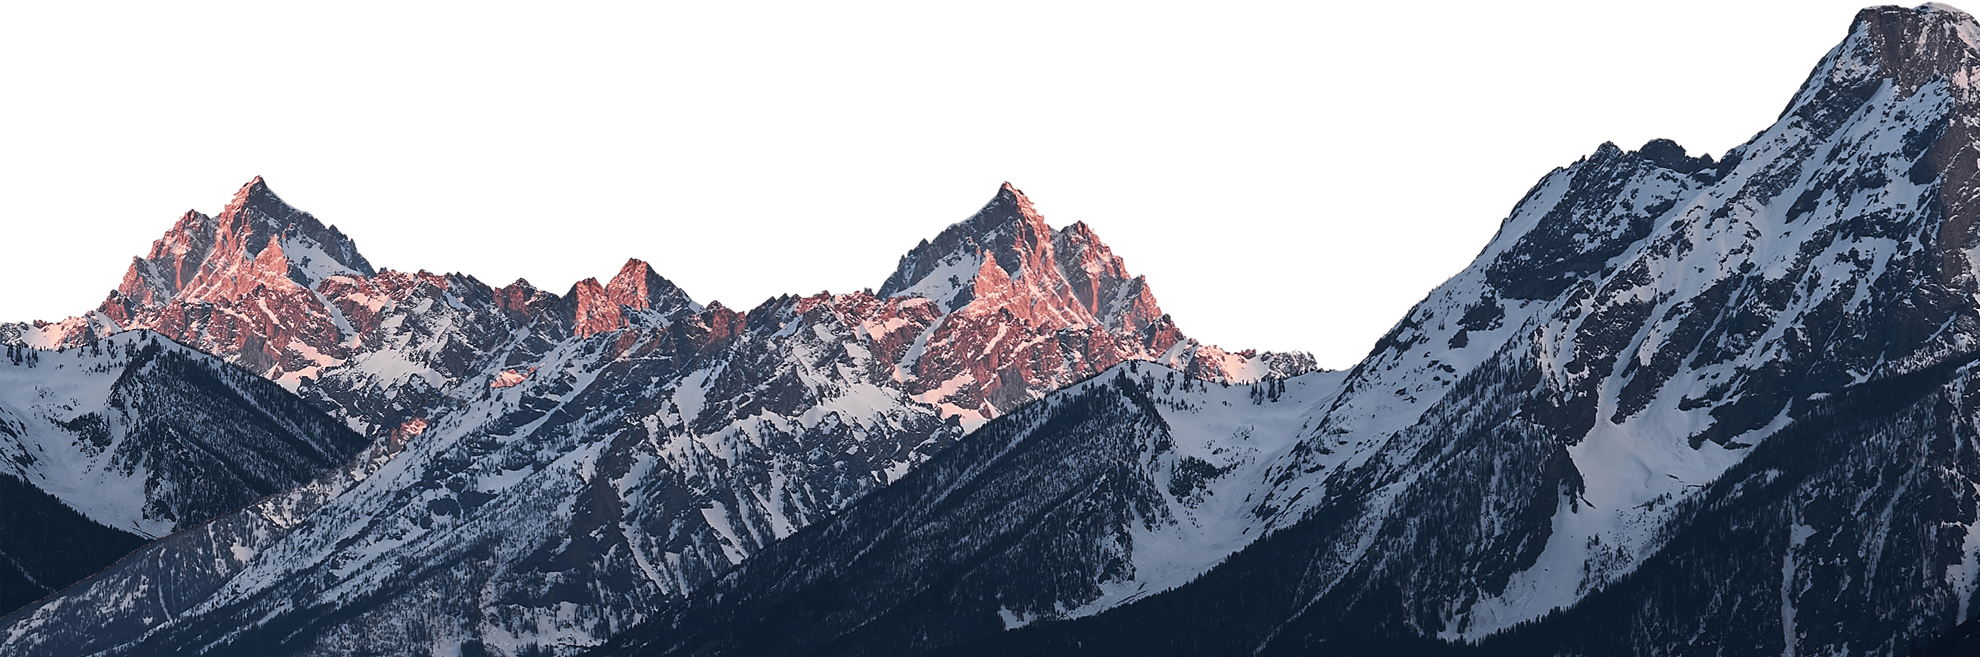 cold mountains